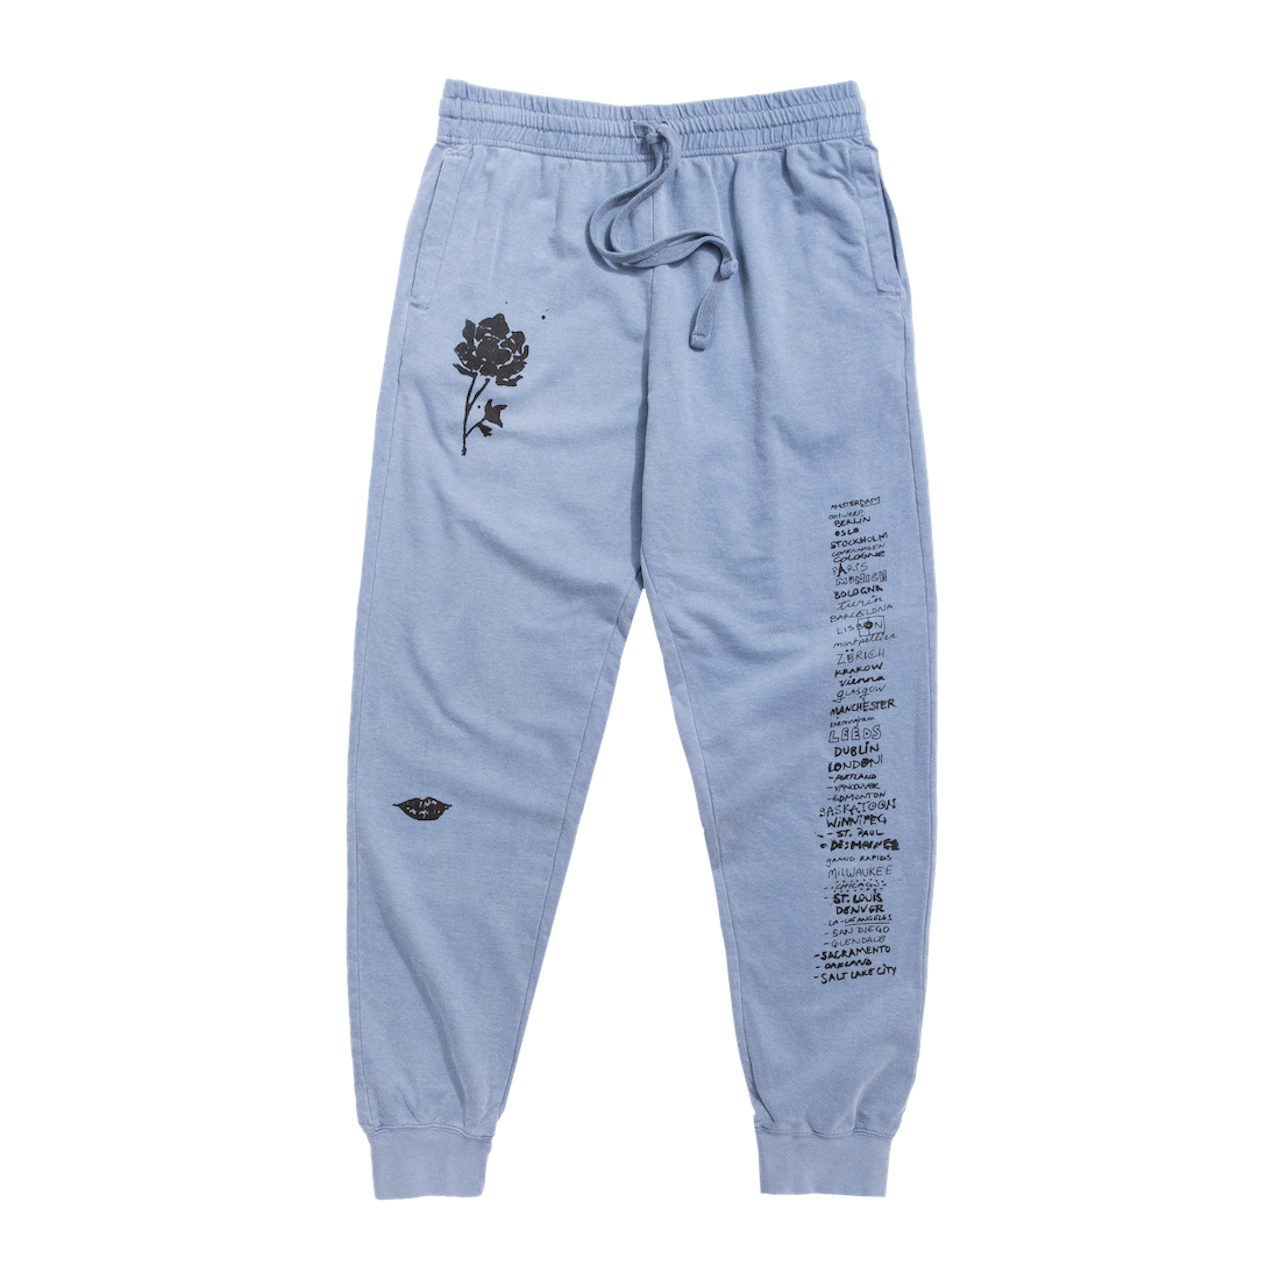 Shawn Mendes The Tour Sketch Ii Sweatpants